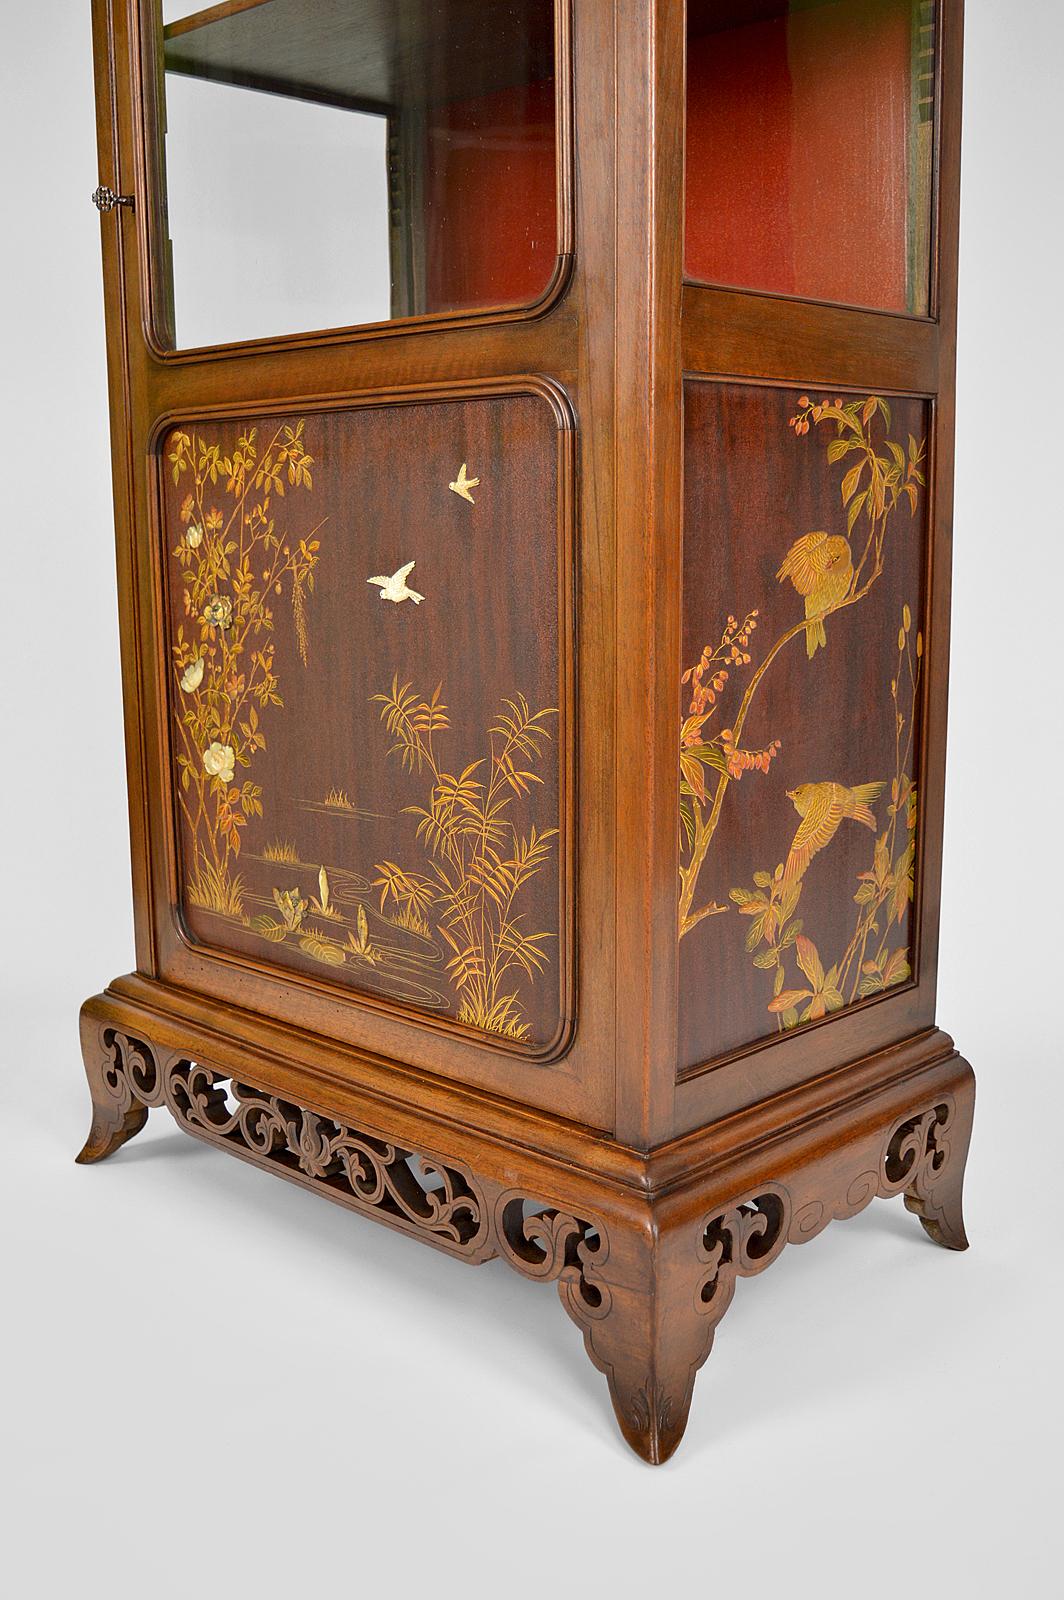 Lacquered Showcase with Inlaid Panels, attributed to Perret and Vibert, Japonisme, 1880